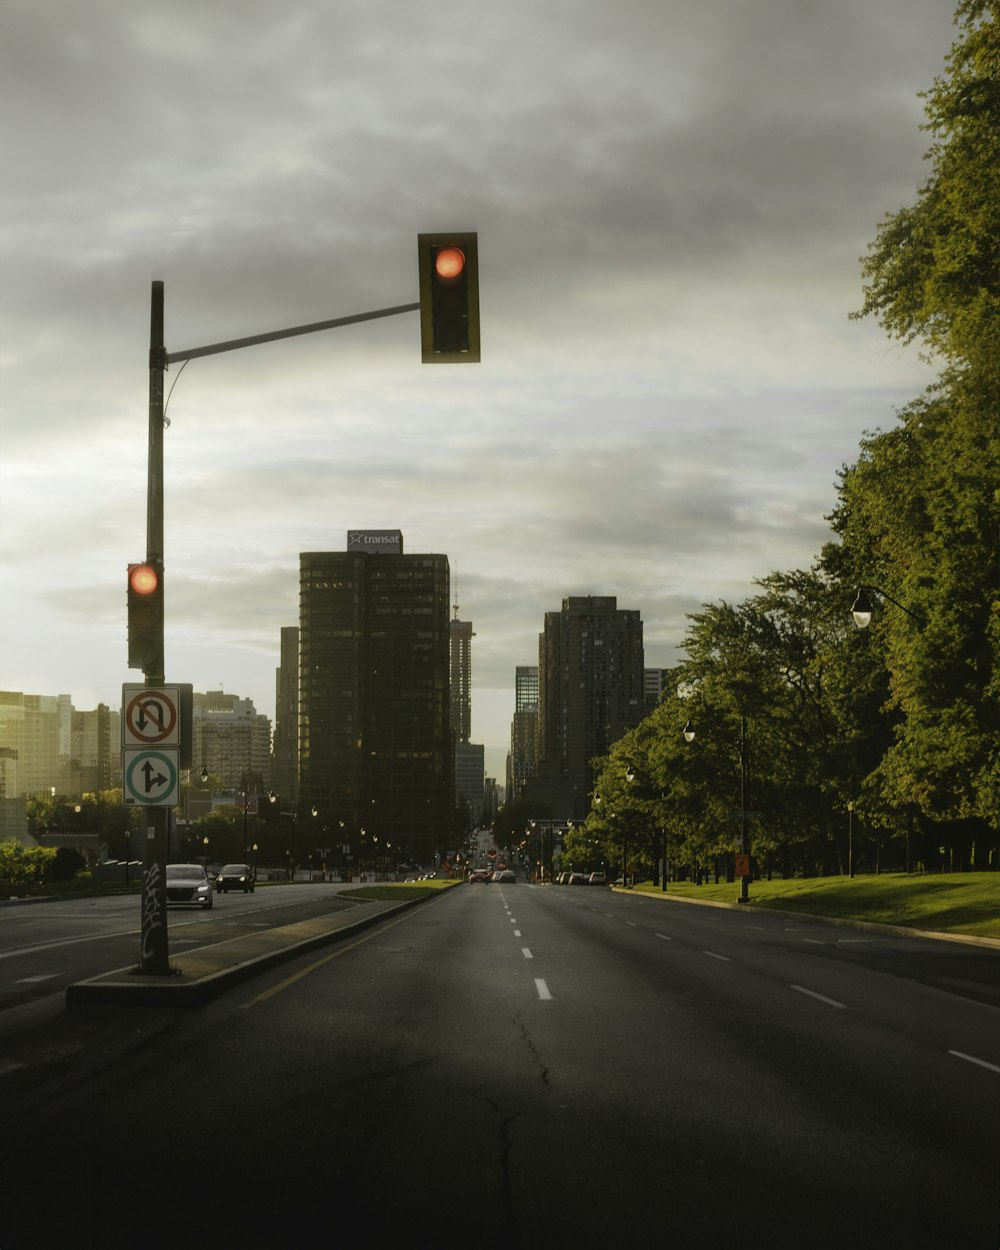 a traffic light on a street with tall buildings in the background